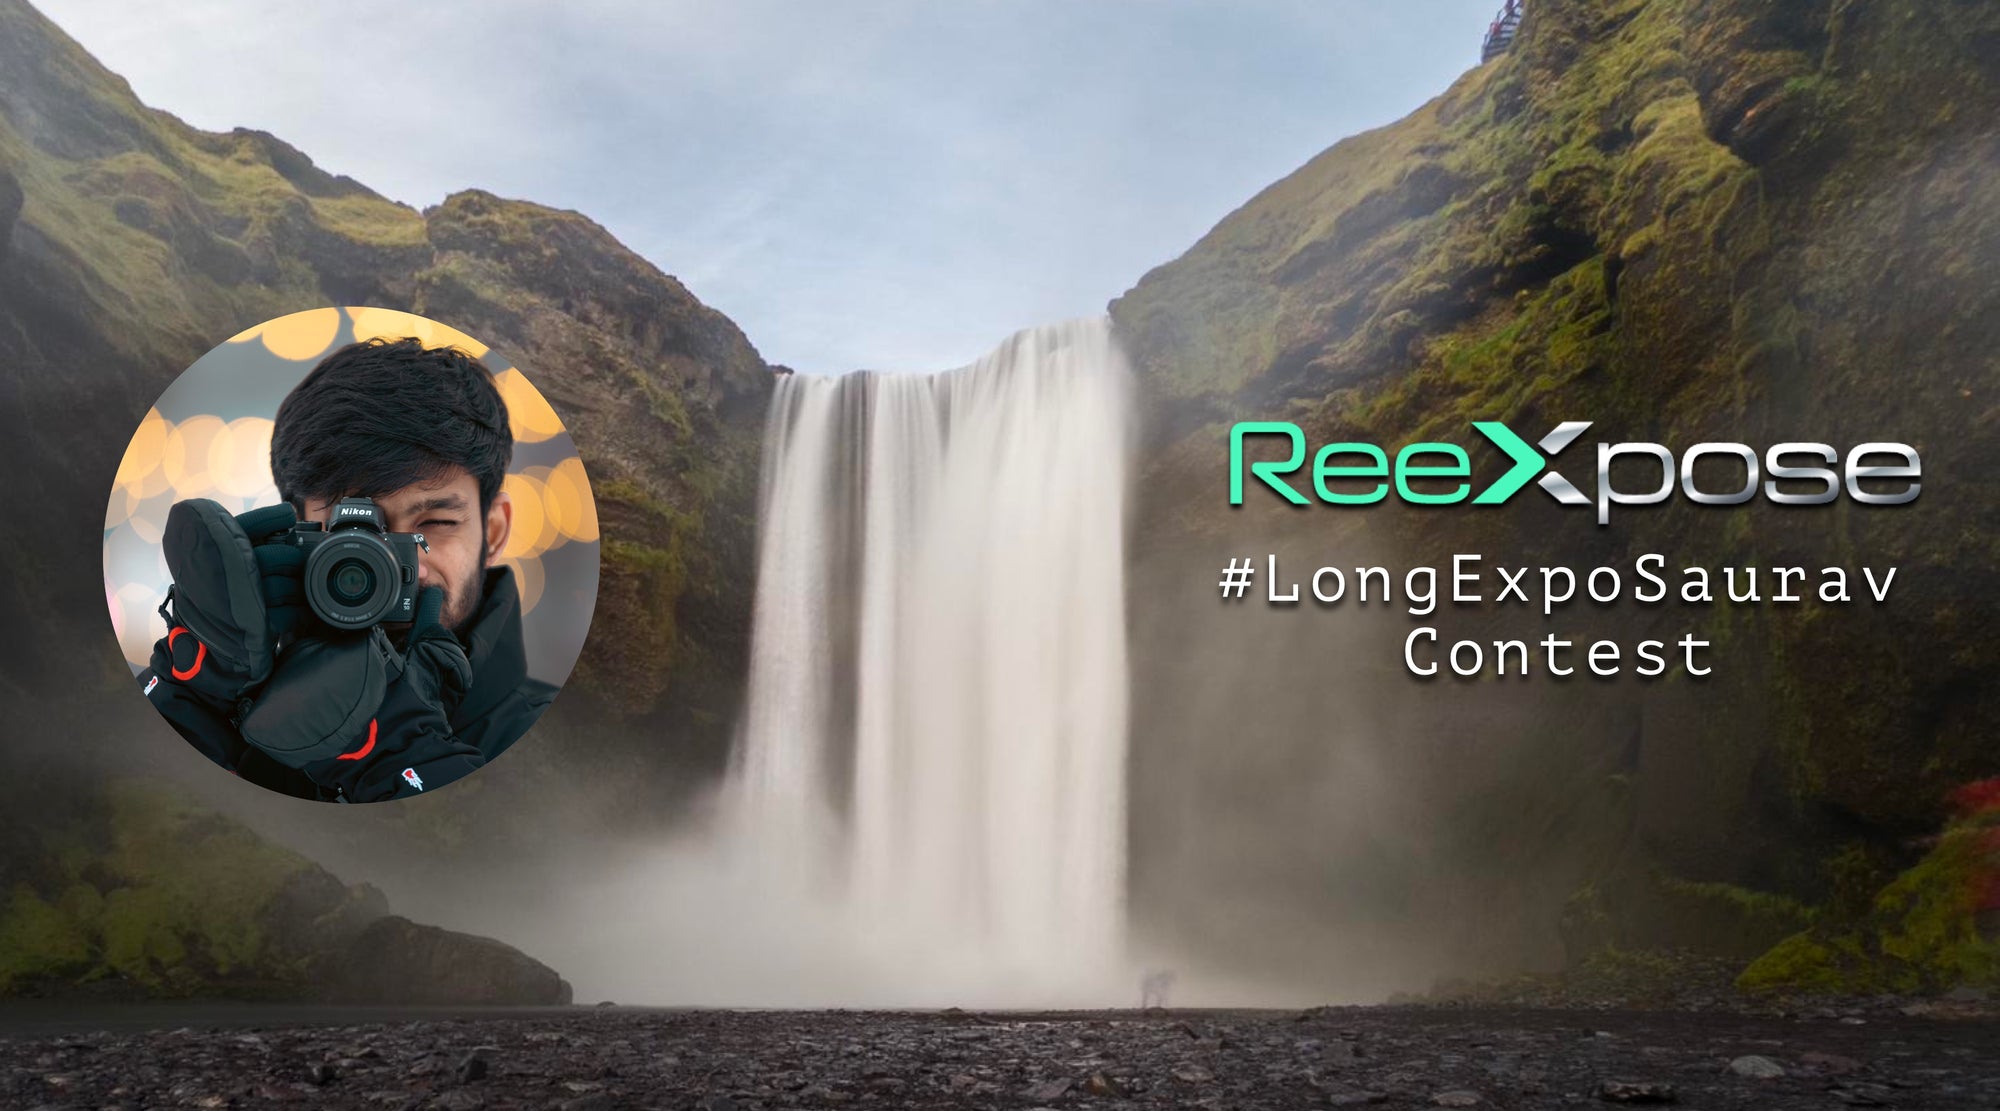 #Long-Expo-Saurav contest & 700$ coupons up for grab!